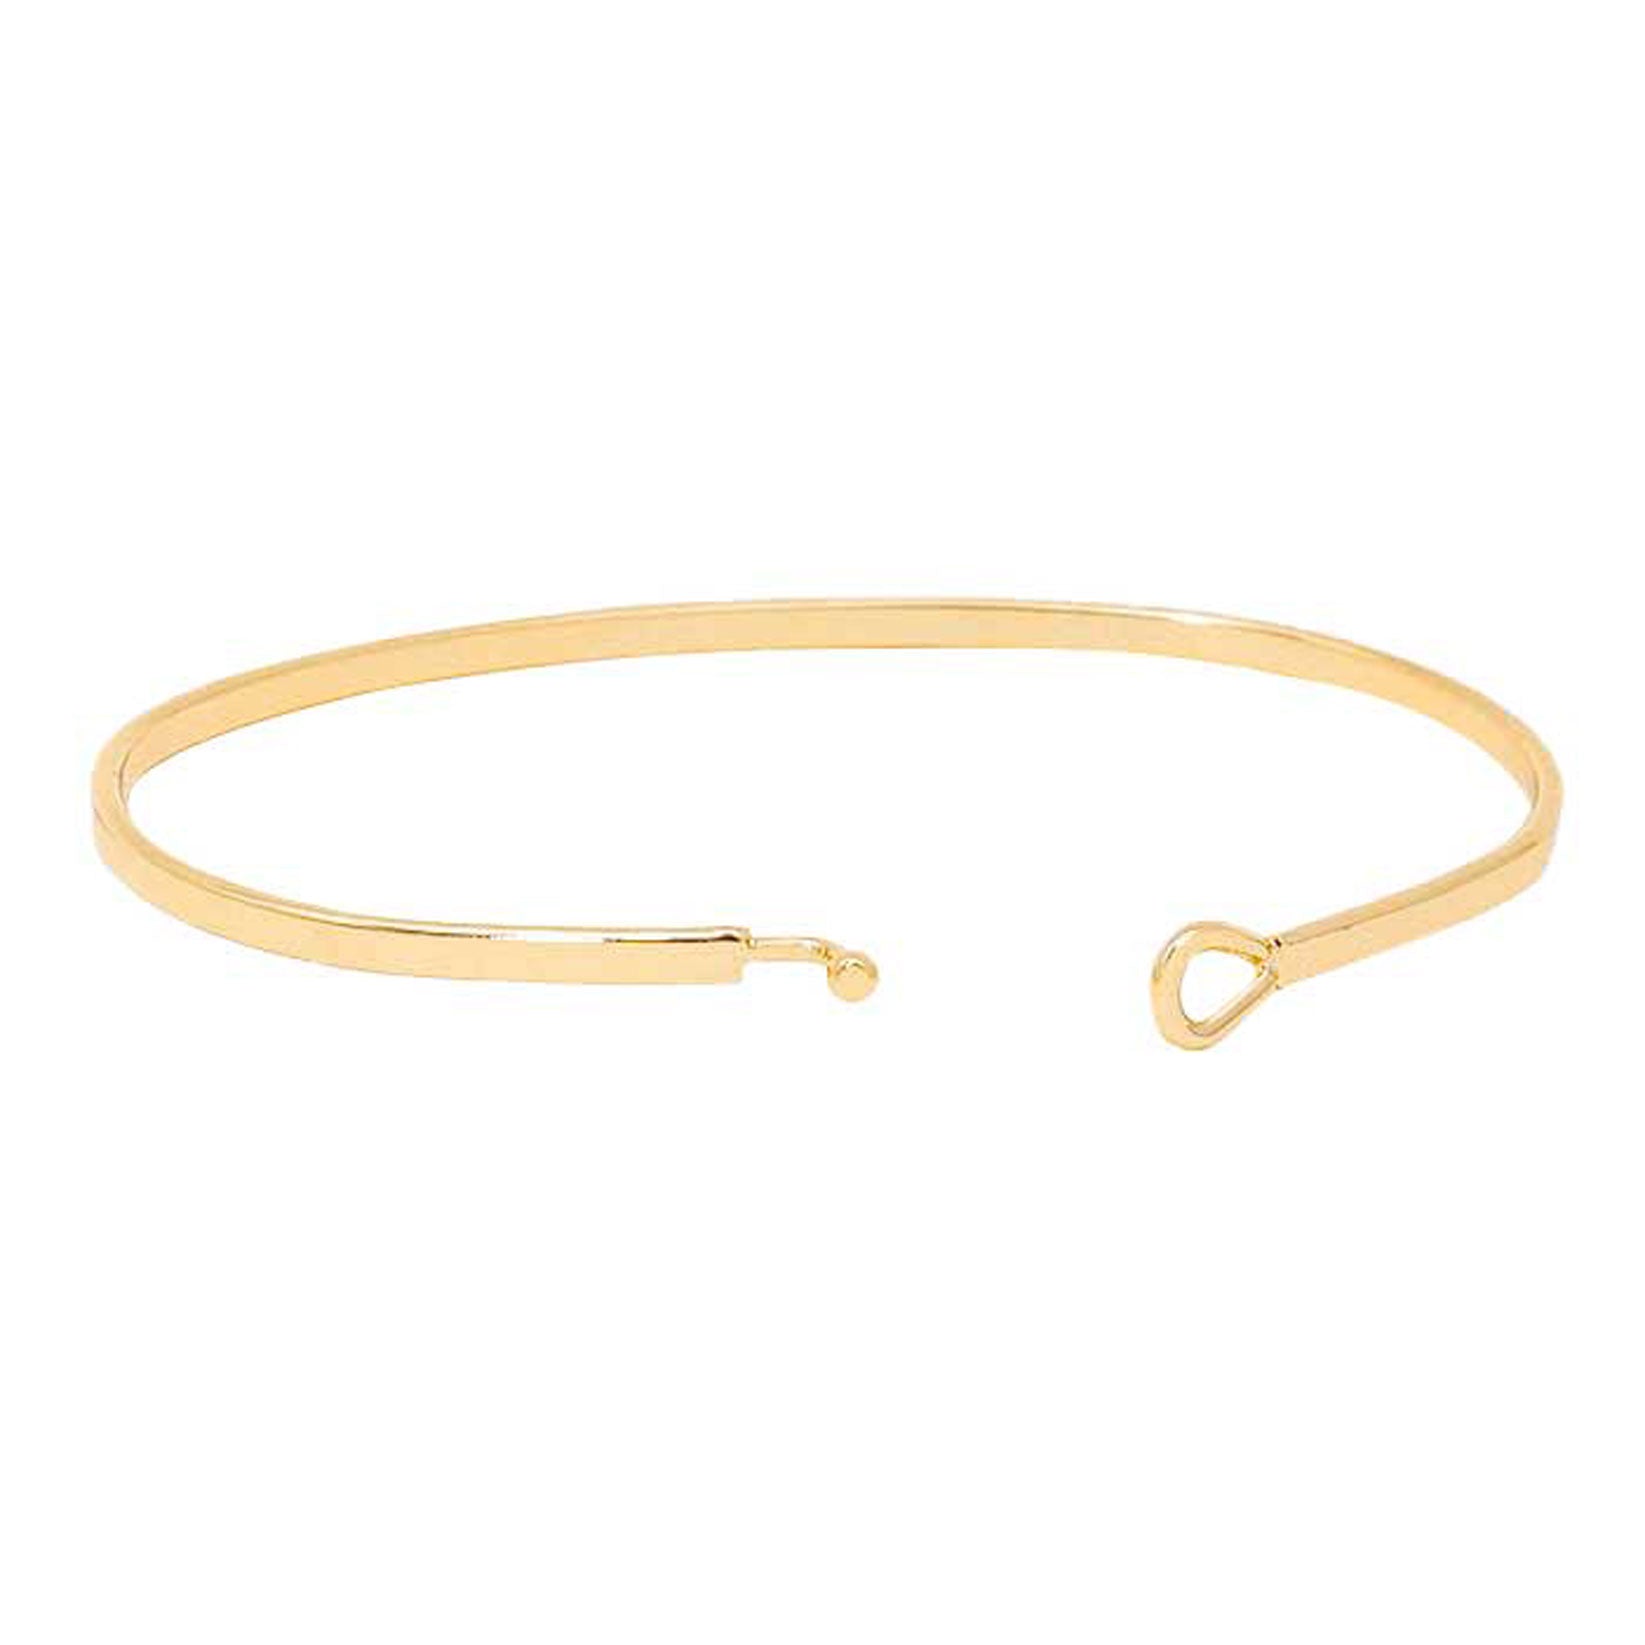 Gold Mother's Blessing Brass Thin Metal Hook Bracelet, These metal circle hook bracelets are easy to put on, take off and so comfortable for daily wear. Pair with a tee and jeans to dress up your laid-back look, or add to a shift dress and pumps to enhance your work-ready ensemble. Makes a great gift for any occasion.